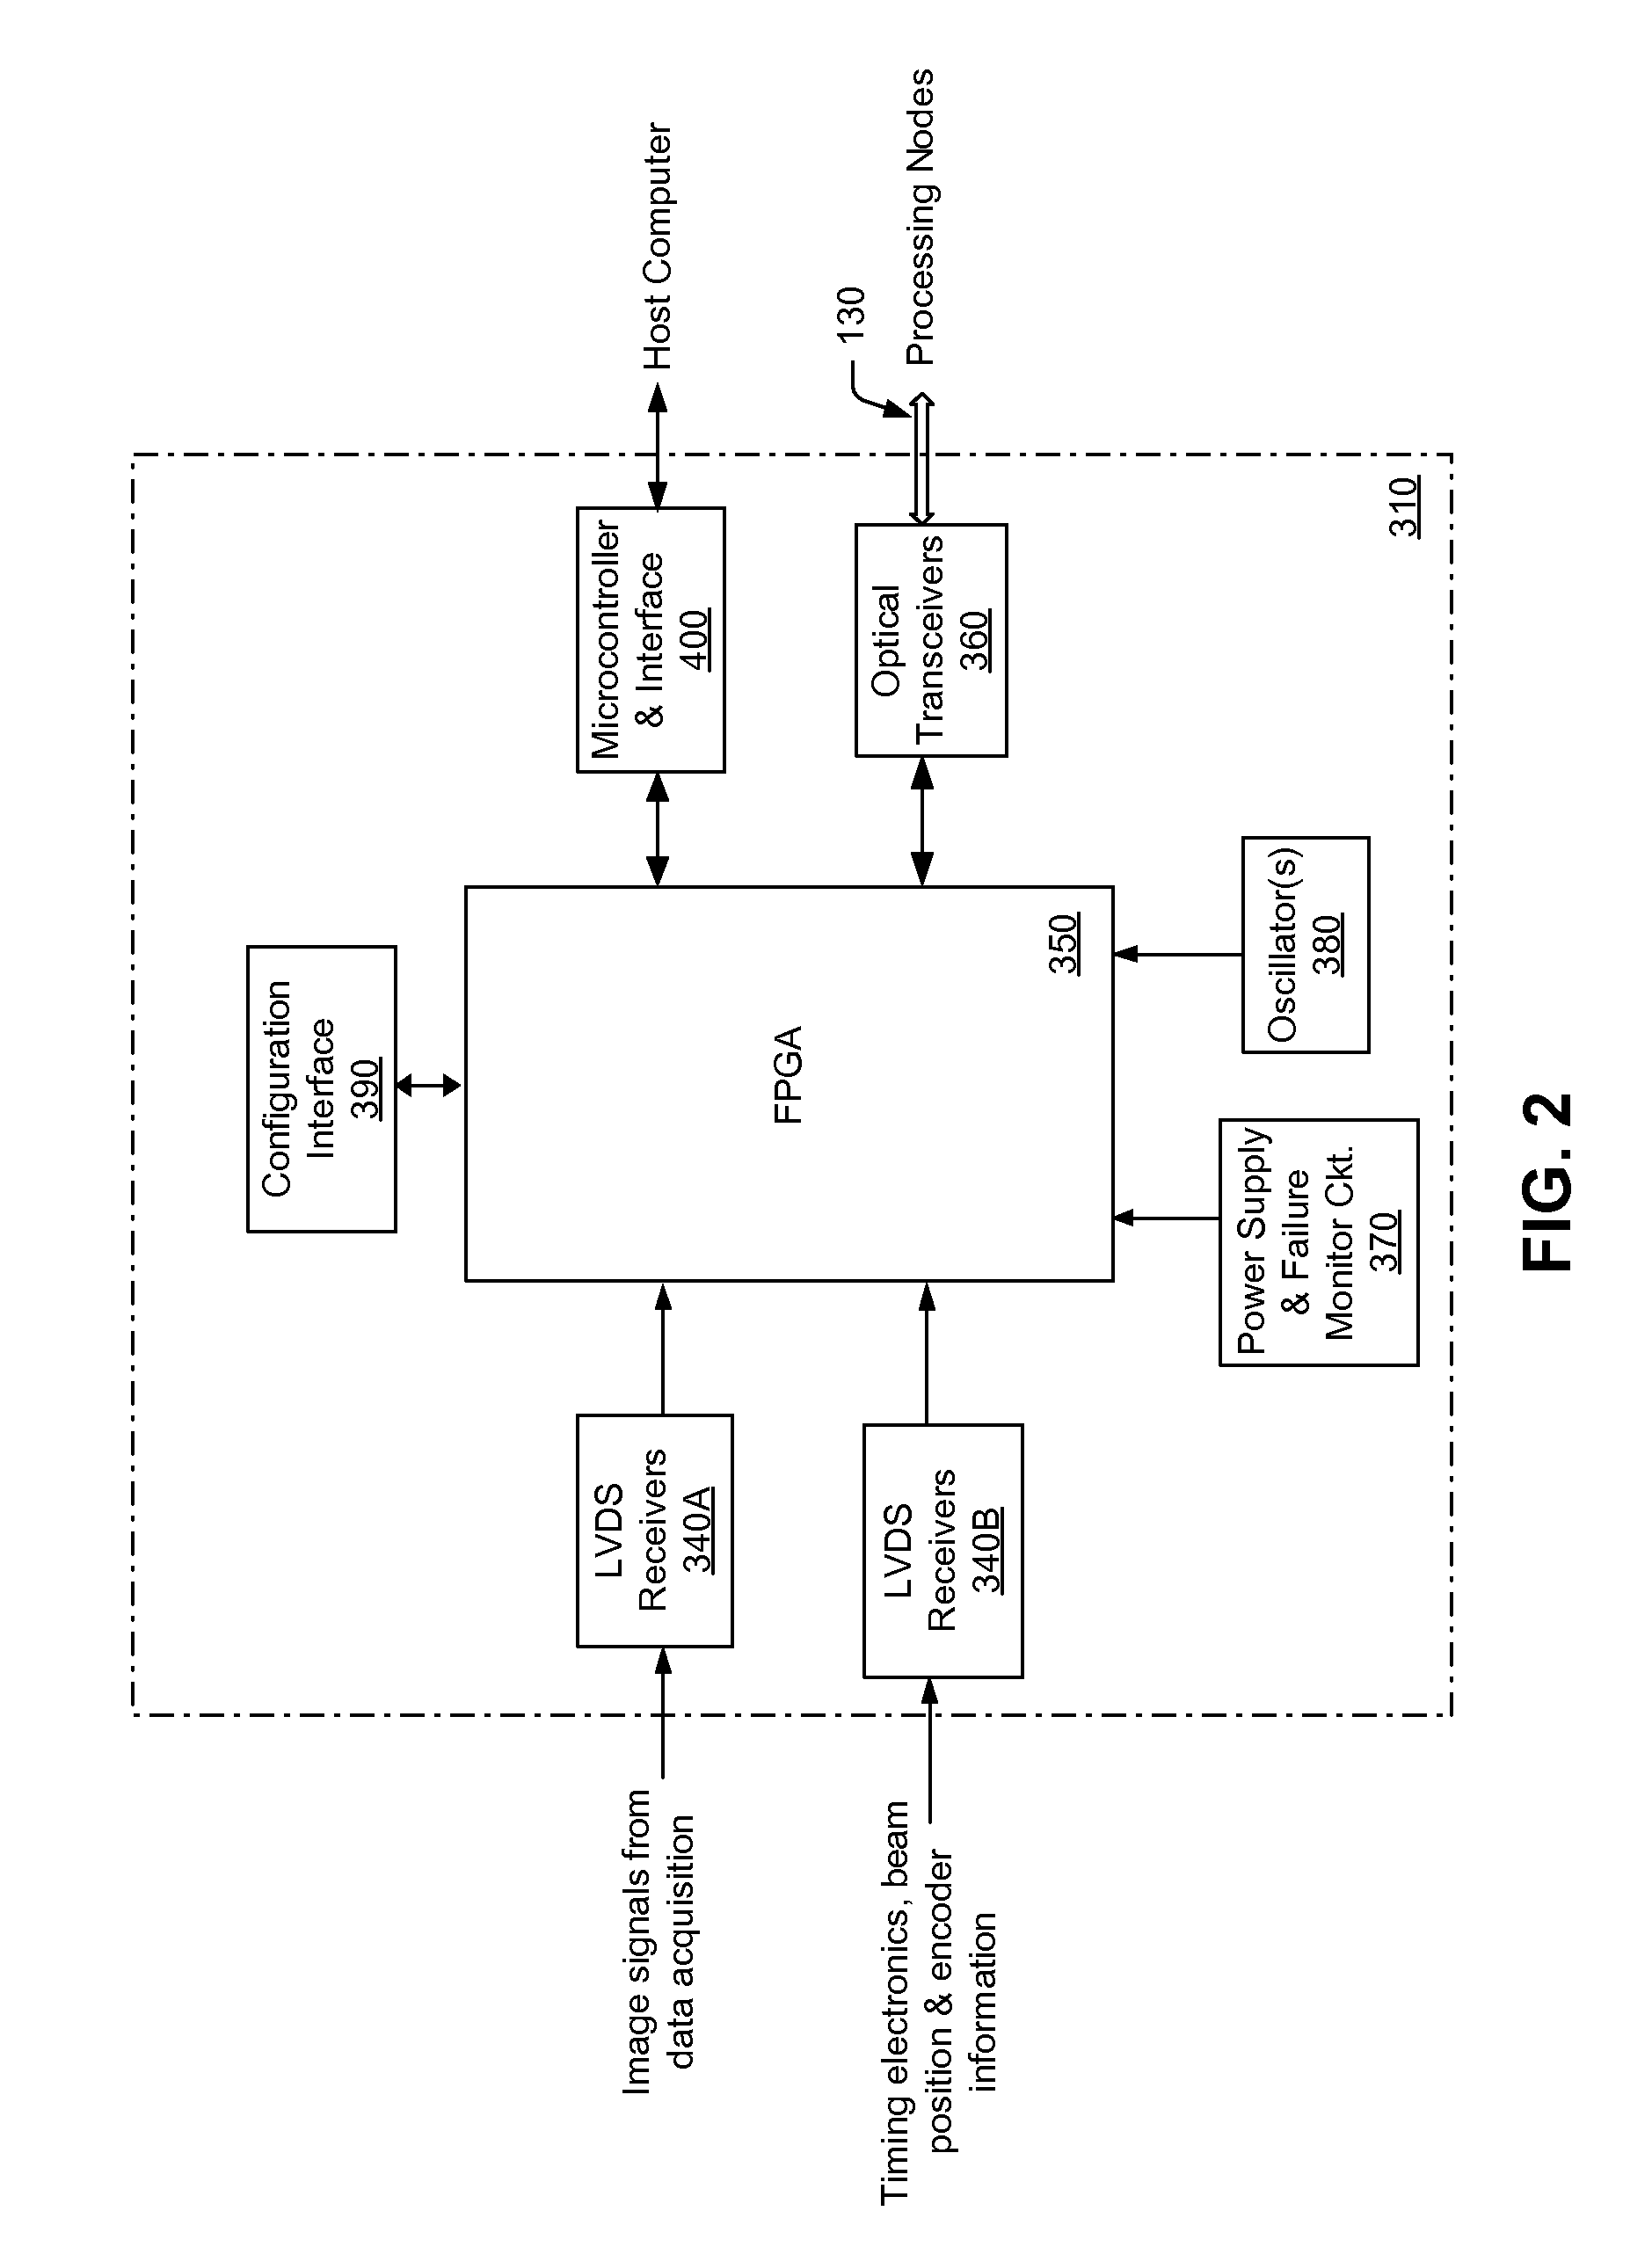 Inspection system and method for high-speed serial data transfer